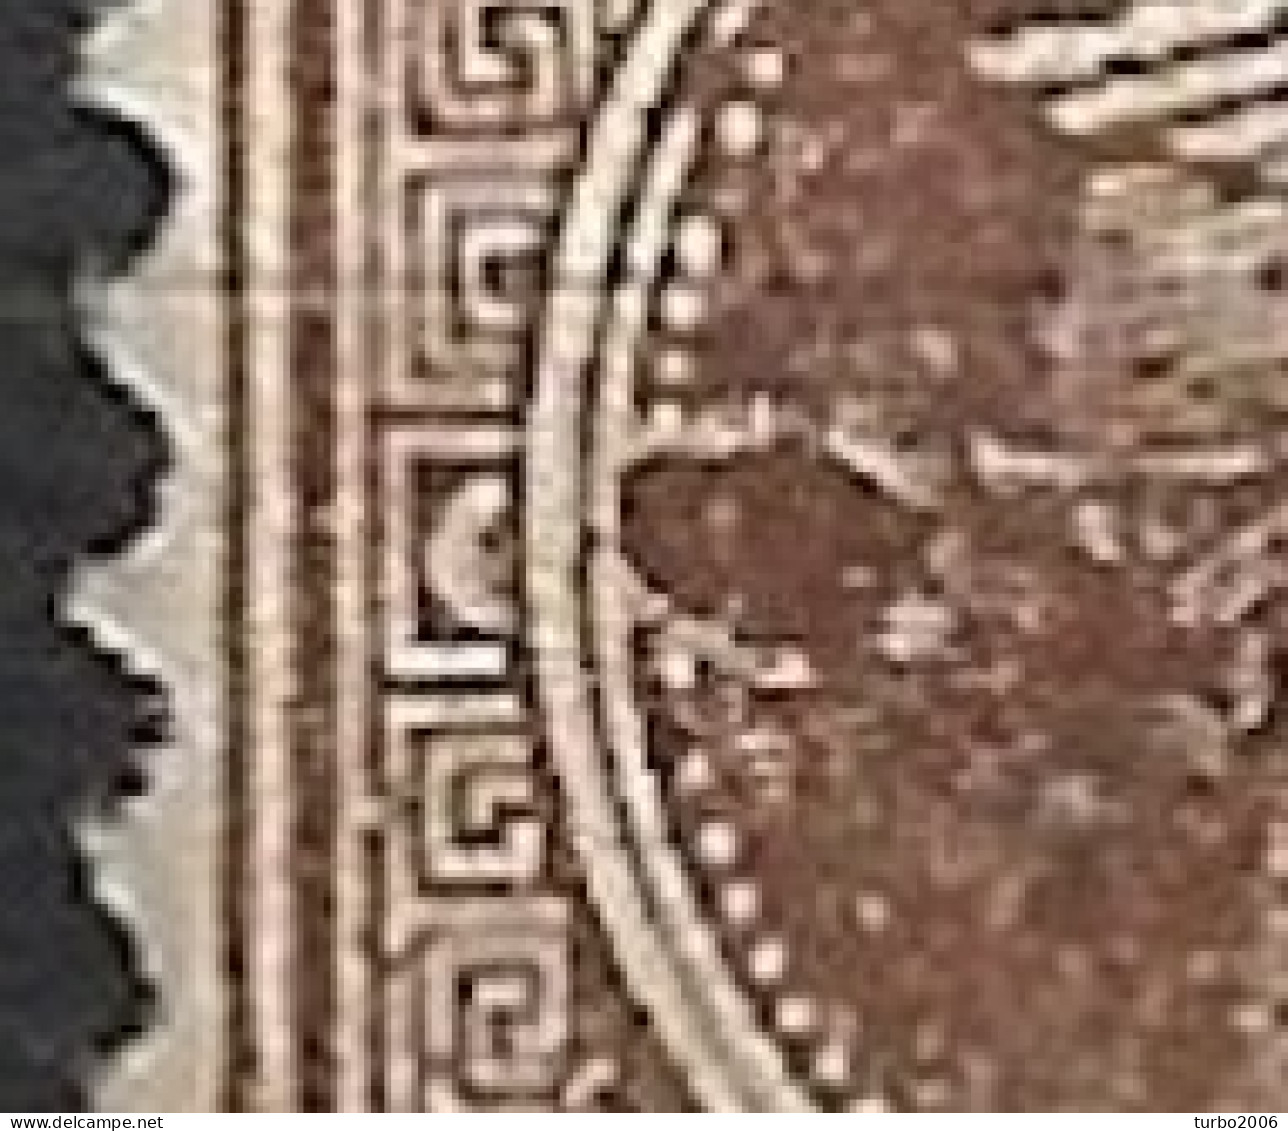 GREECE Large Colourspot In 1891-1896 Small Hermes Heads 1 L Brown Perforated Vl. 107 - Oblitérés